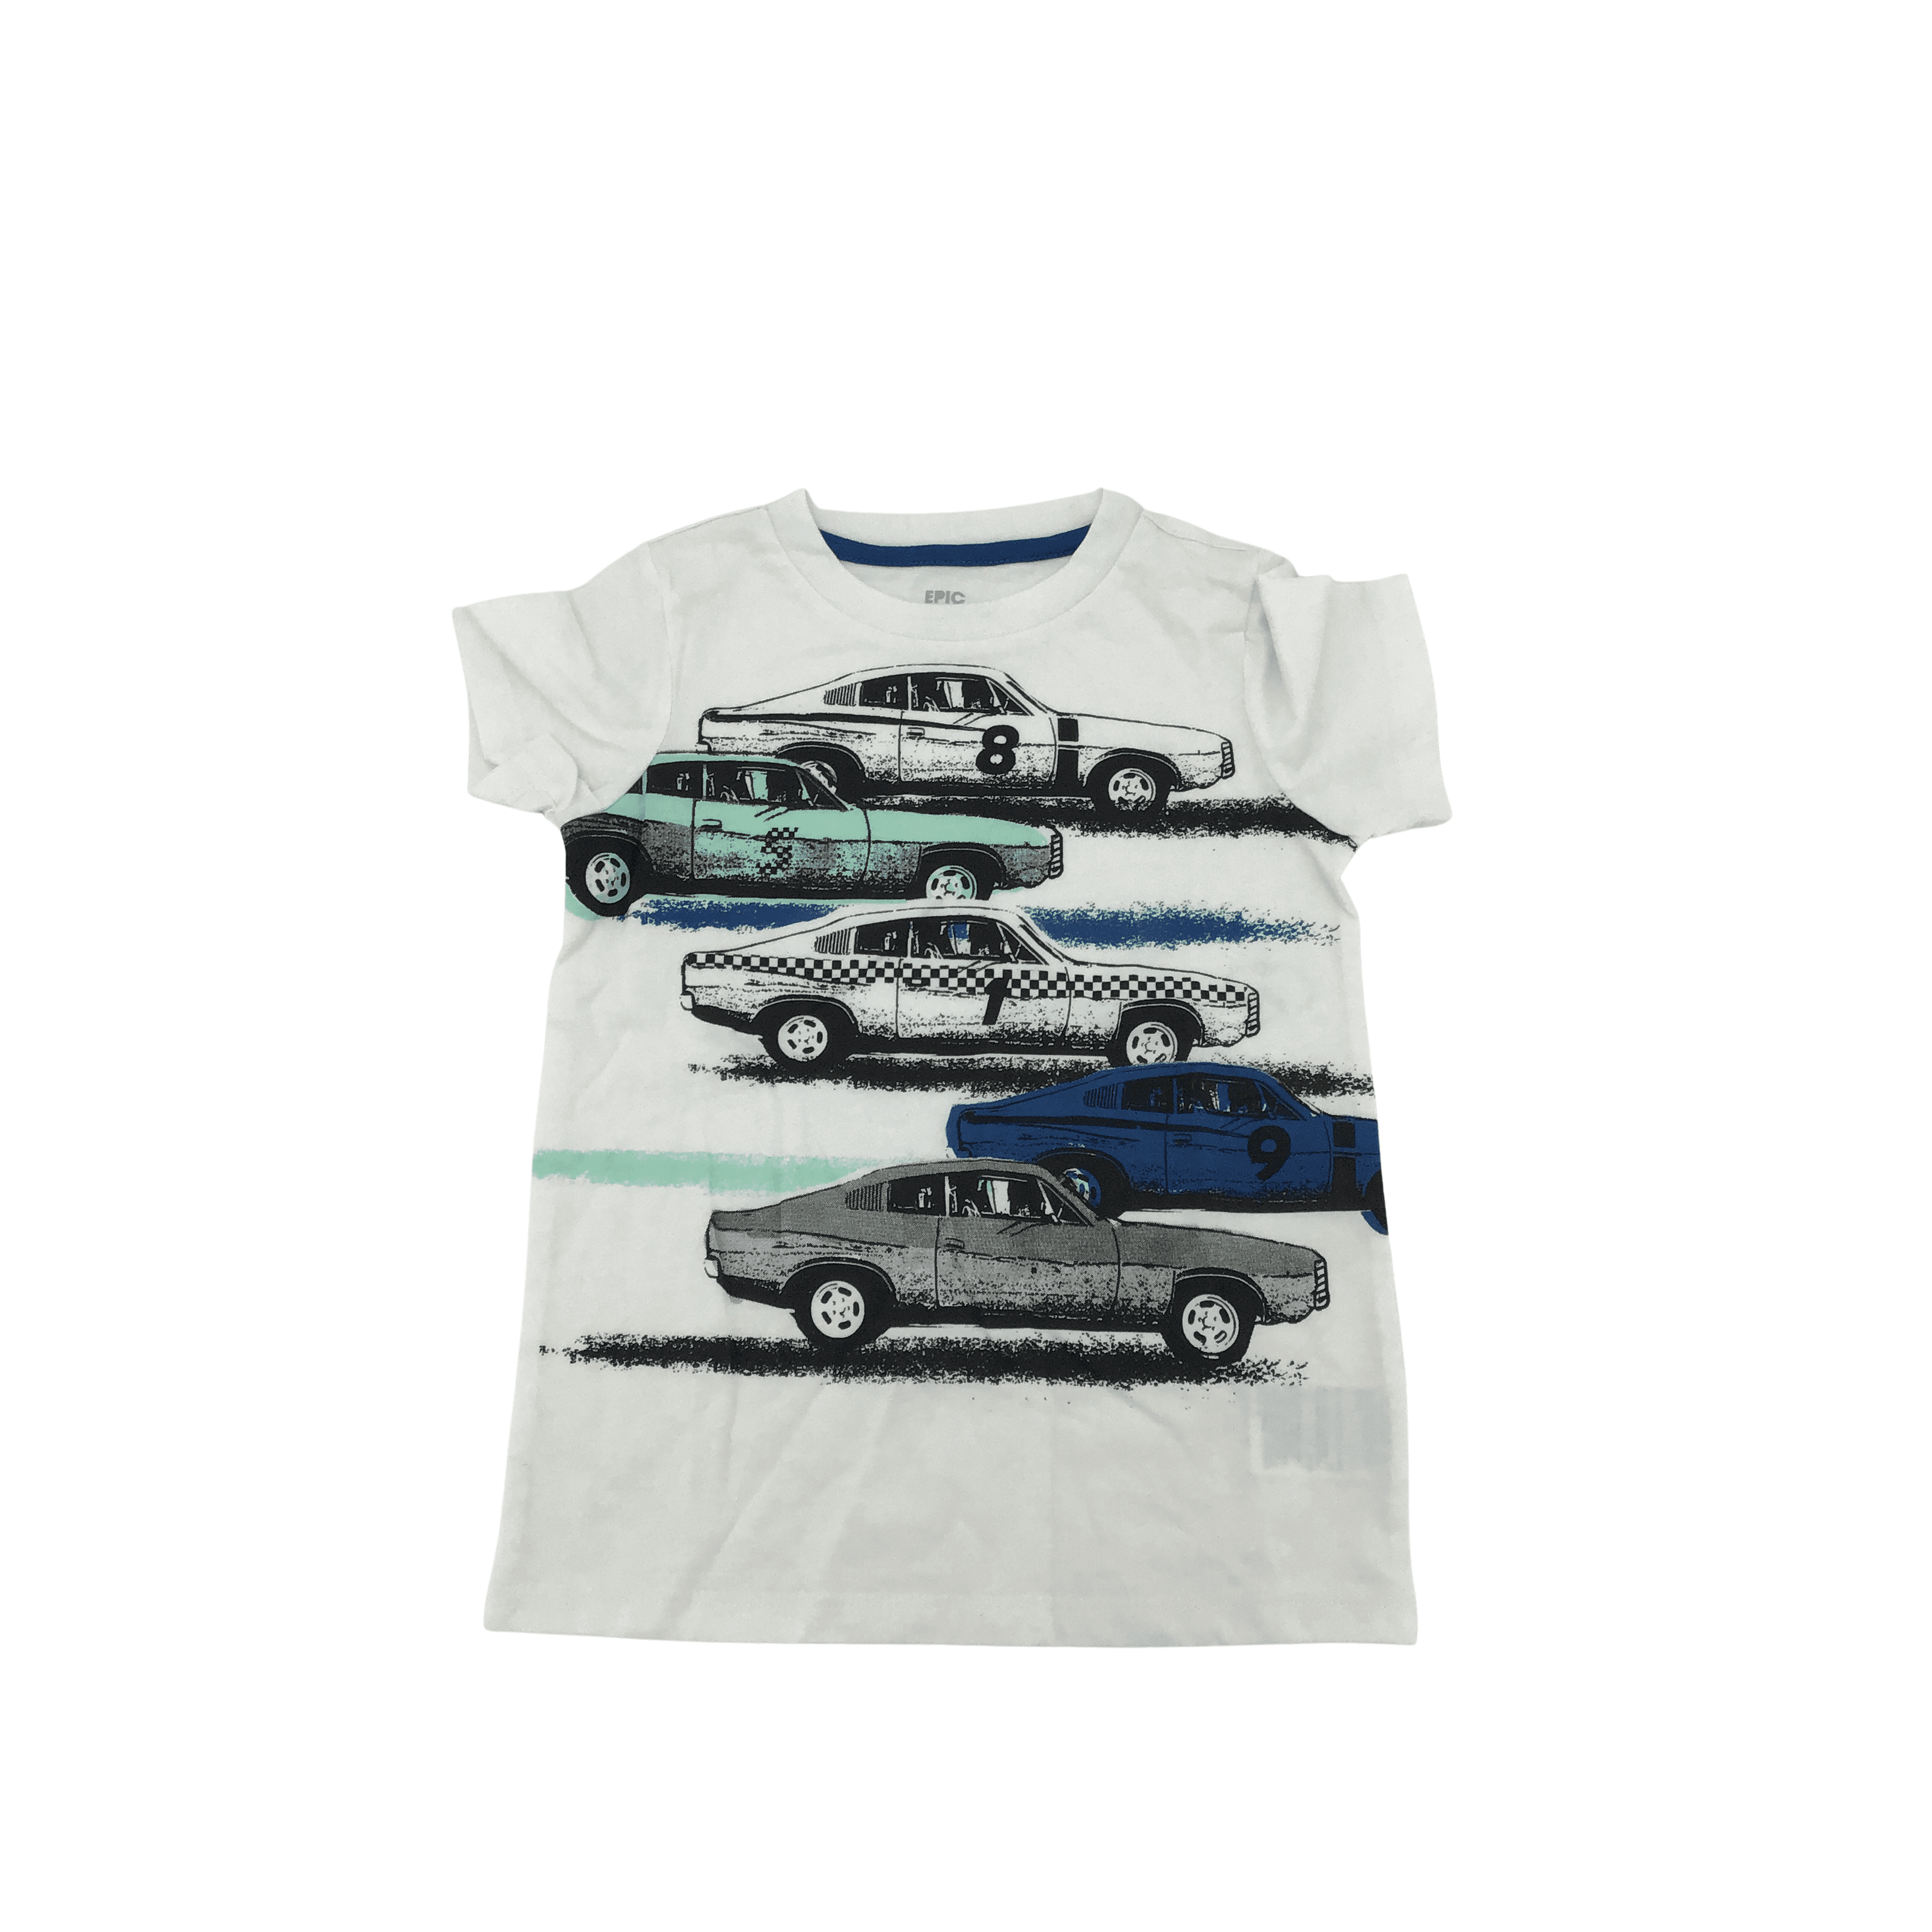 Epic Threads Boy's T-Shirt: White with Cars / Various Sizes